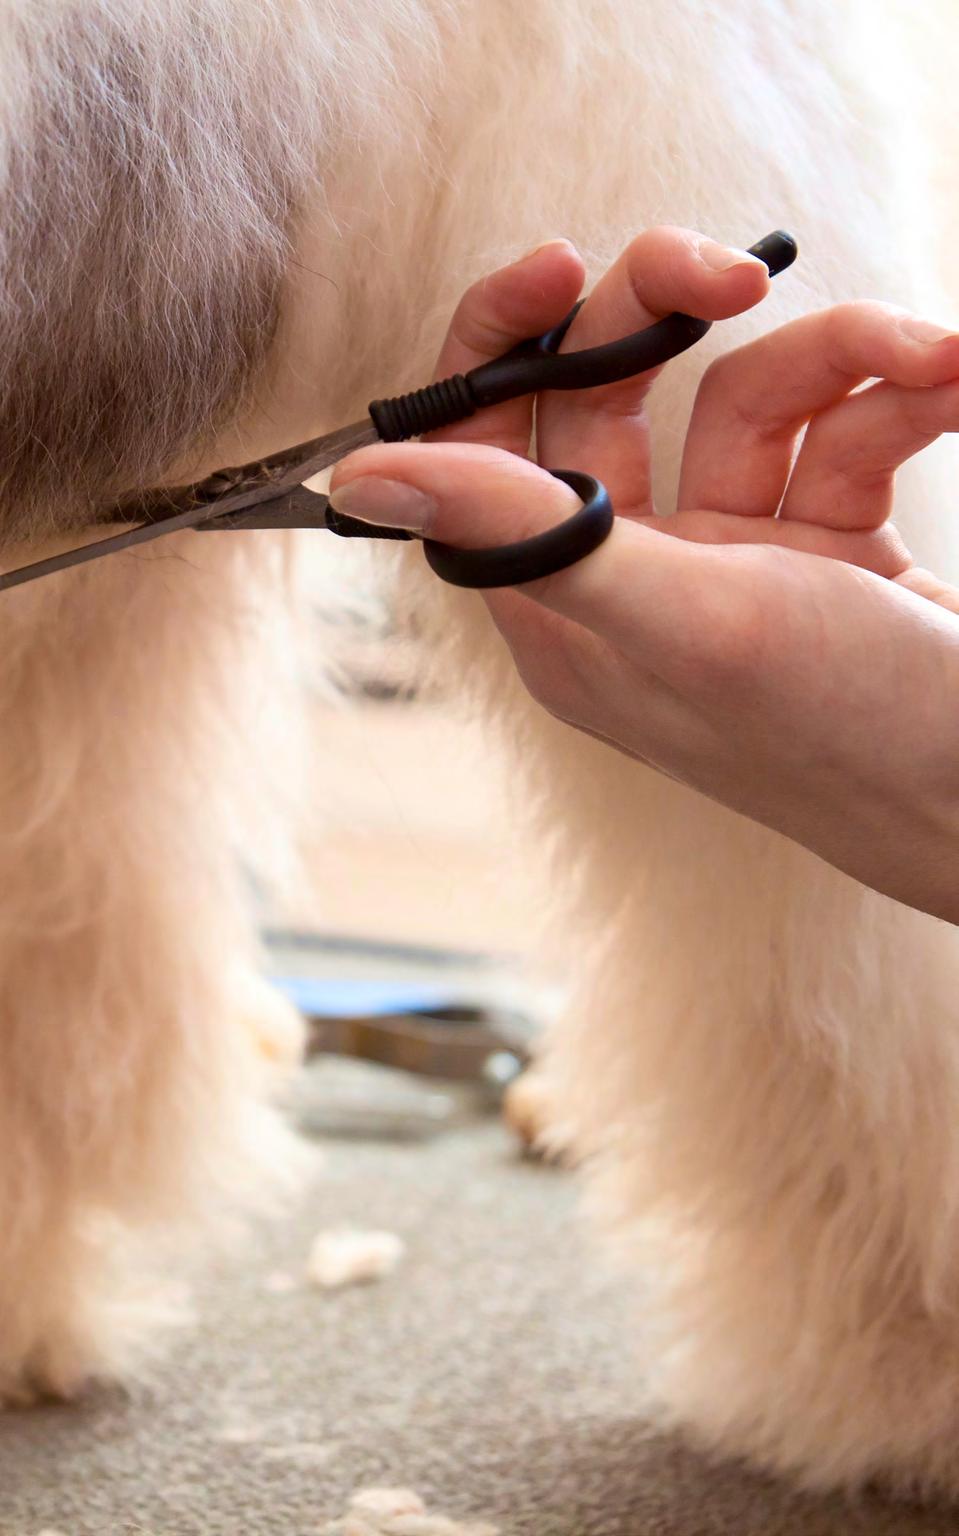 Job Description What is Dog Grooming? Duties As mentioned before, the duties of a dog groomer go beyond aesthetic styling (although you can specialize in creative grooming).